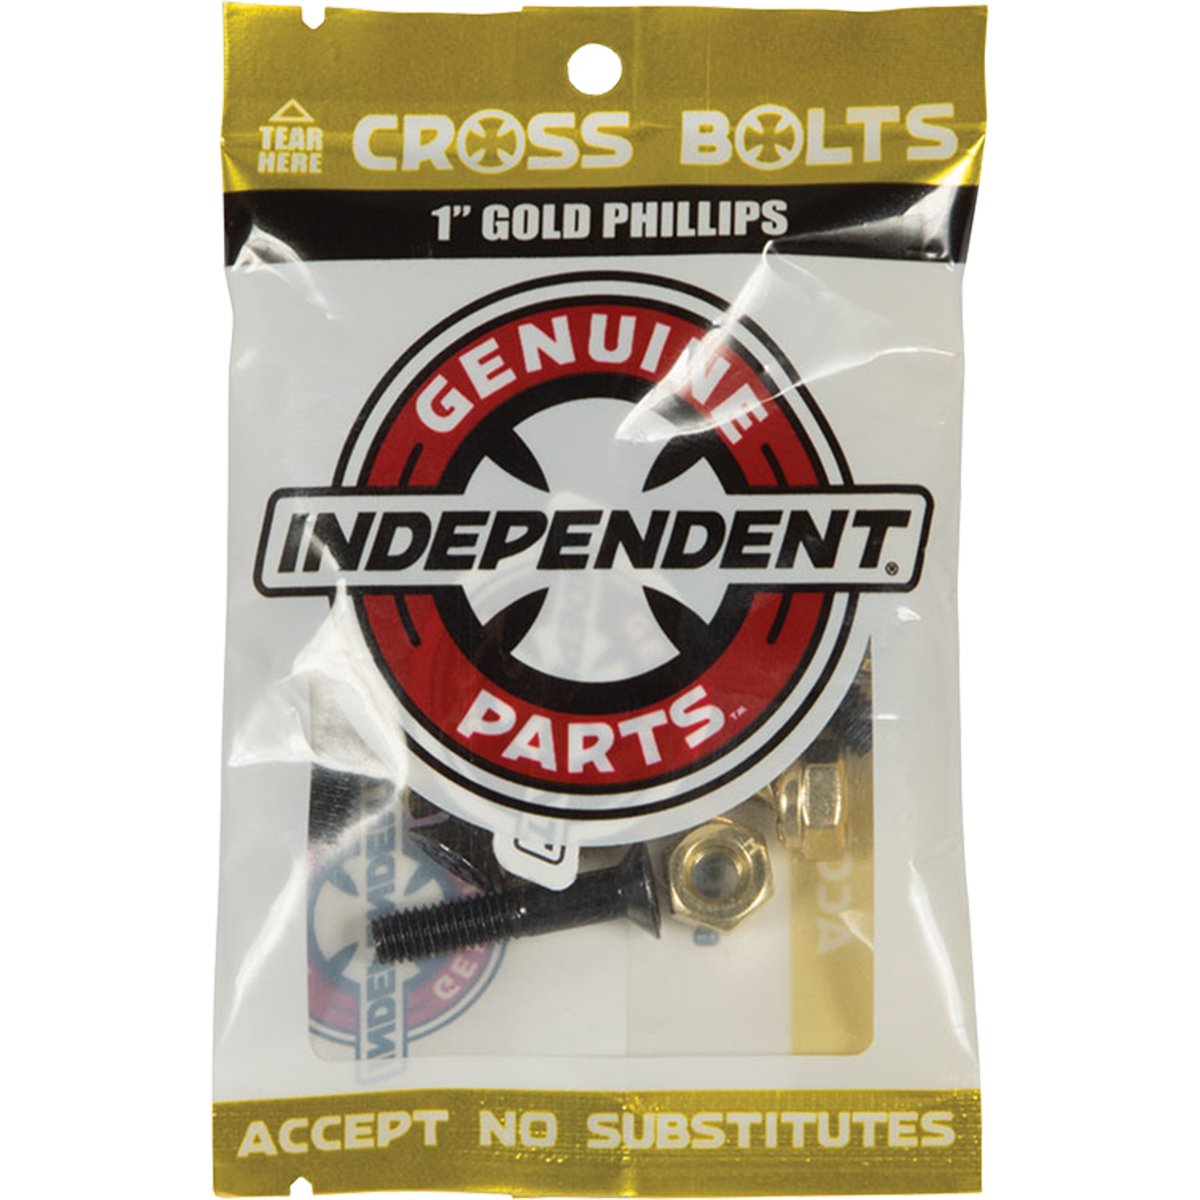 Independent Cross Bolts 1” Gold Philips Skate Hardware